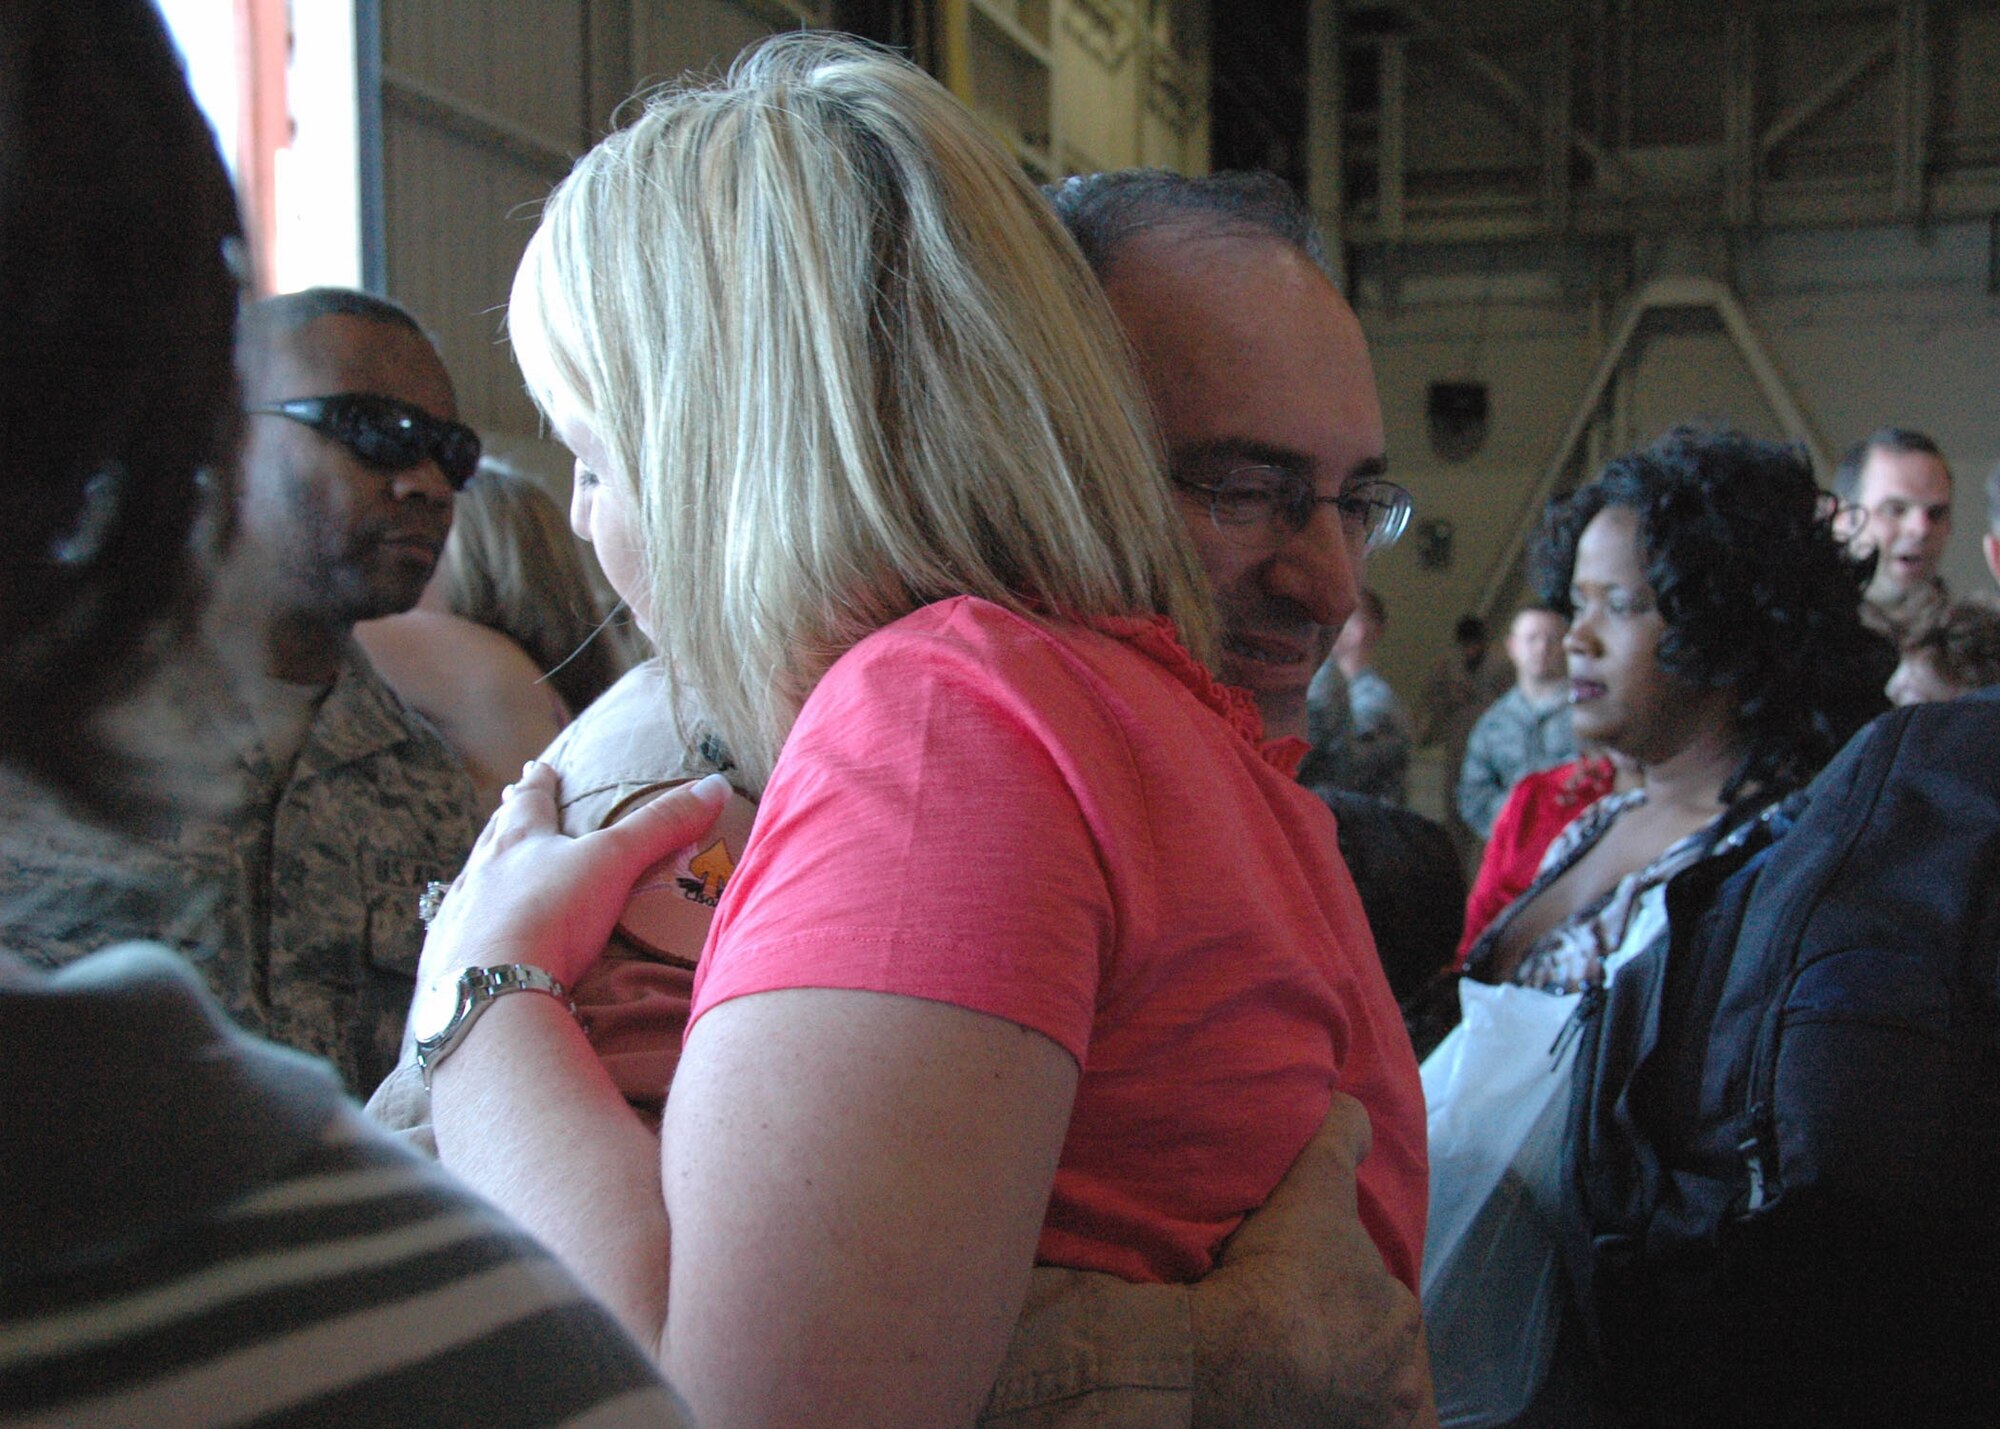 Air Force Reserve Lt. Col. Christopher Snider from Duke Field's 711th Special Operations Squadron hugs his wife Christina inside a hangar at Hurlburt Field April 6. Known as Operation Homecoming, the event reunited returning Duke Field and Hurlburt warfighters with family, fellow Airmen and local civic leaders following lengthy deployments in support of operations in Southwest Asia. (U.S. Air Force photo/Dan Neely)